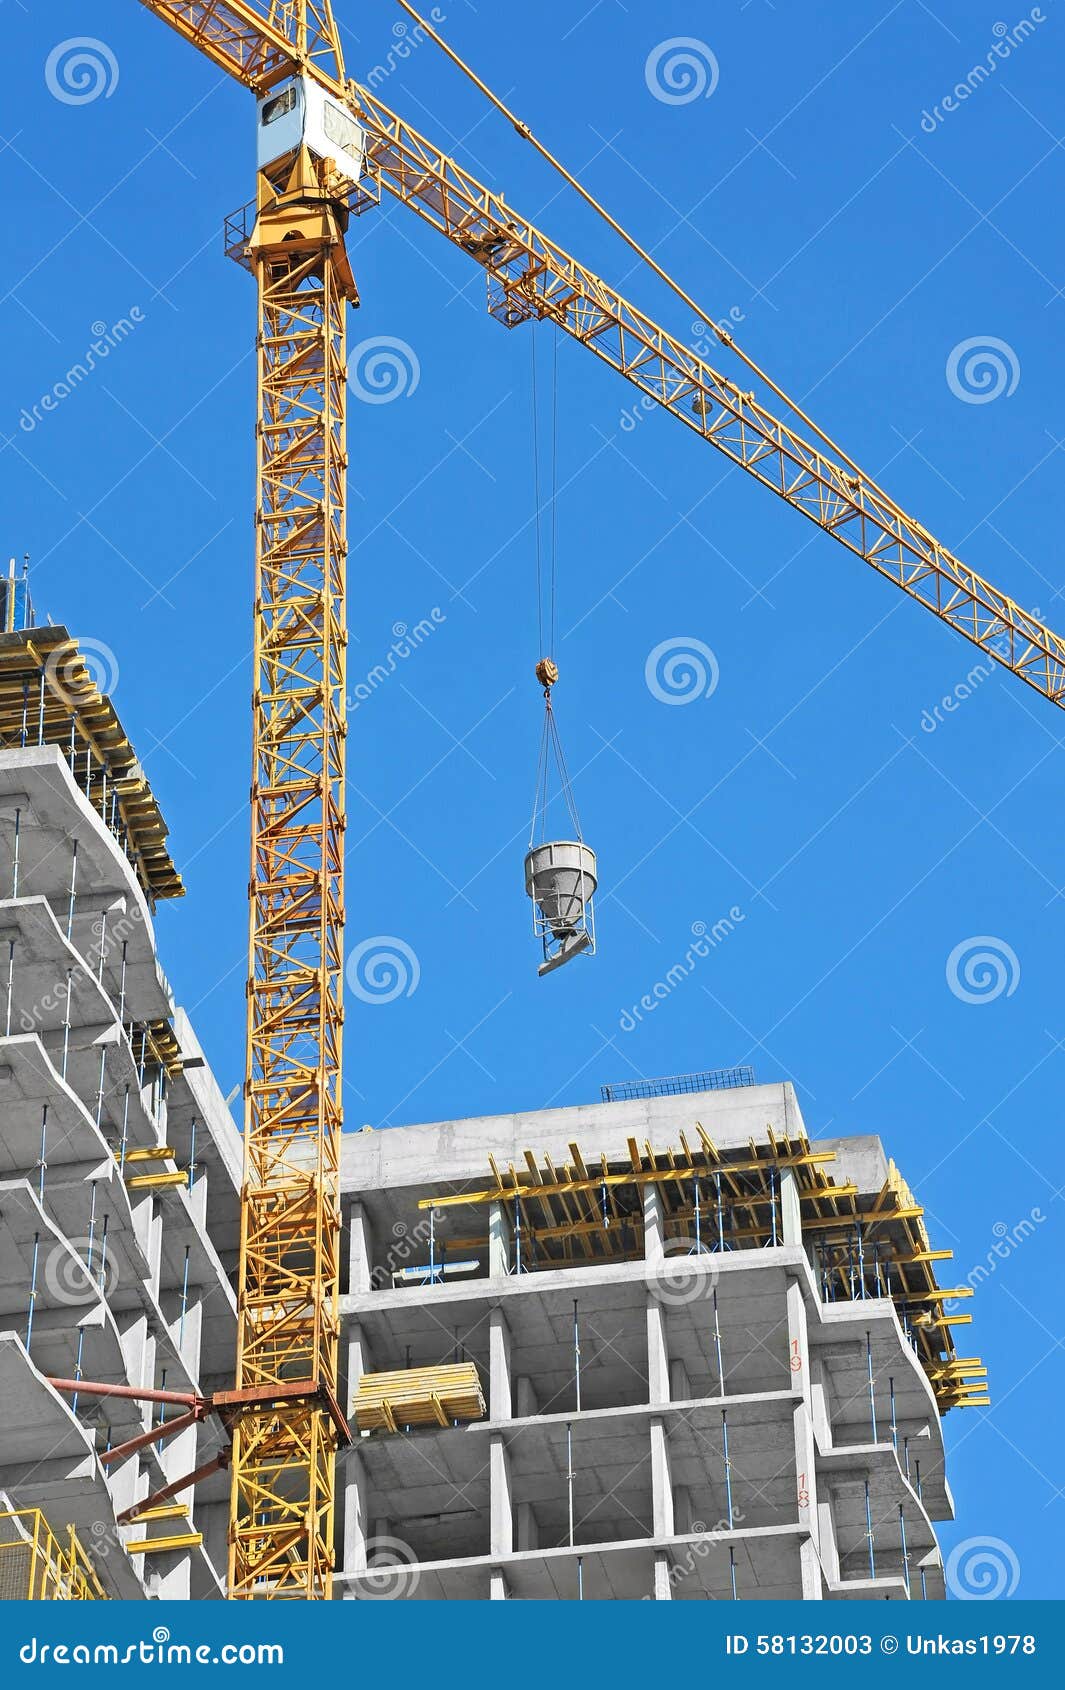 Crane Lifting Cement Mixing Container Stock Image - Image of iron